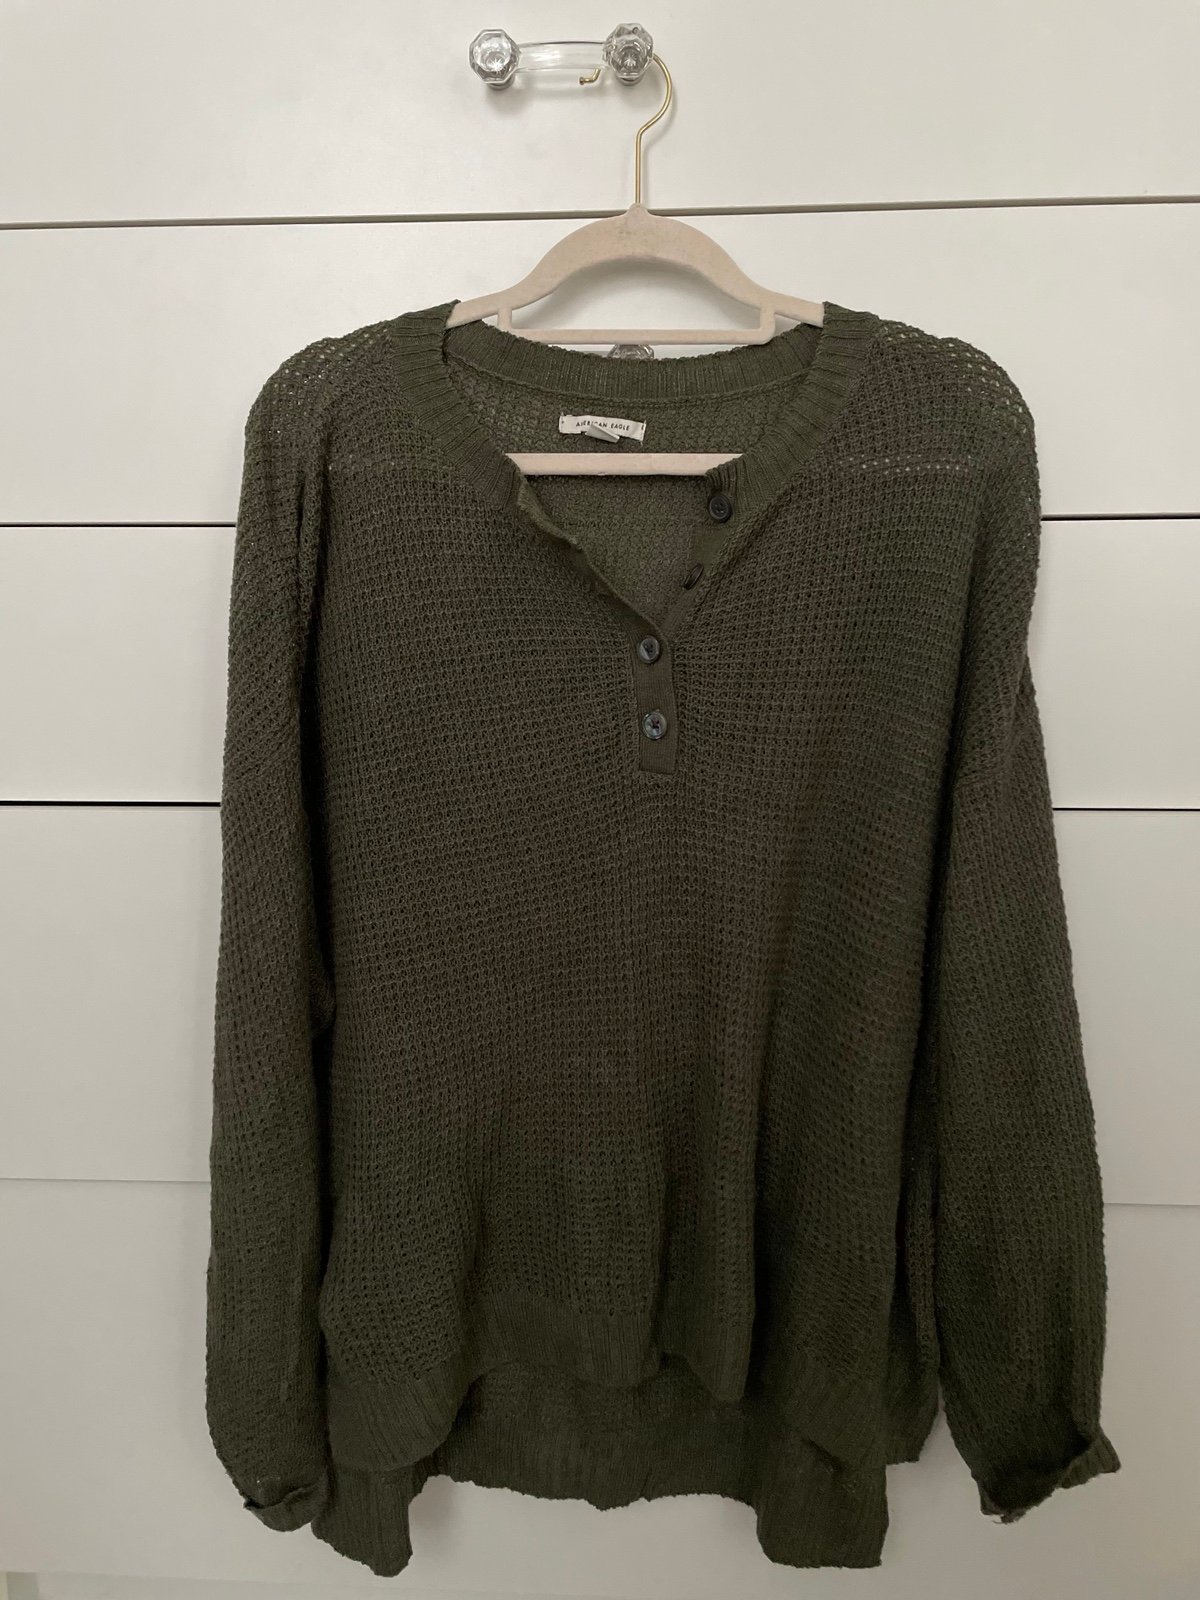 floor price American eagle henley Sweater fnTbeS0or High Quaity